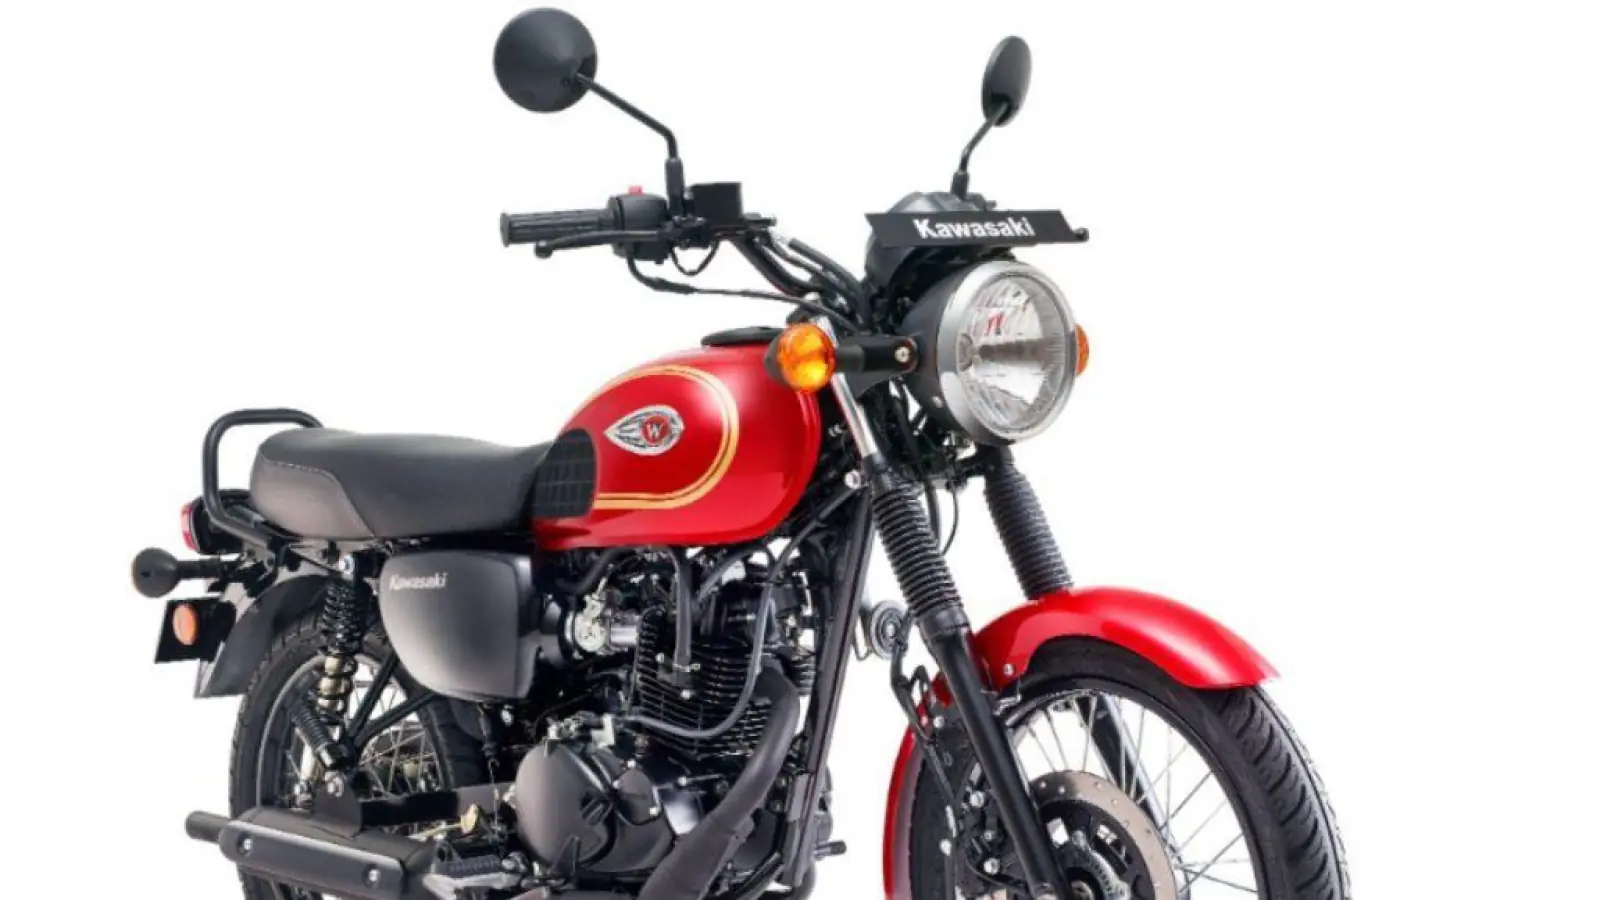 Kawasaki W175 Street launched in India, know all the details from price to engine